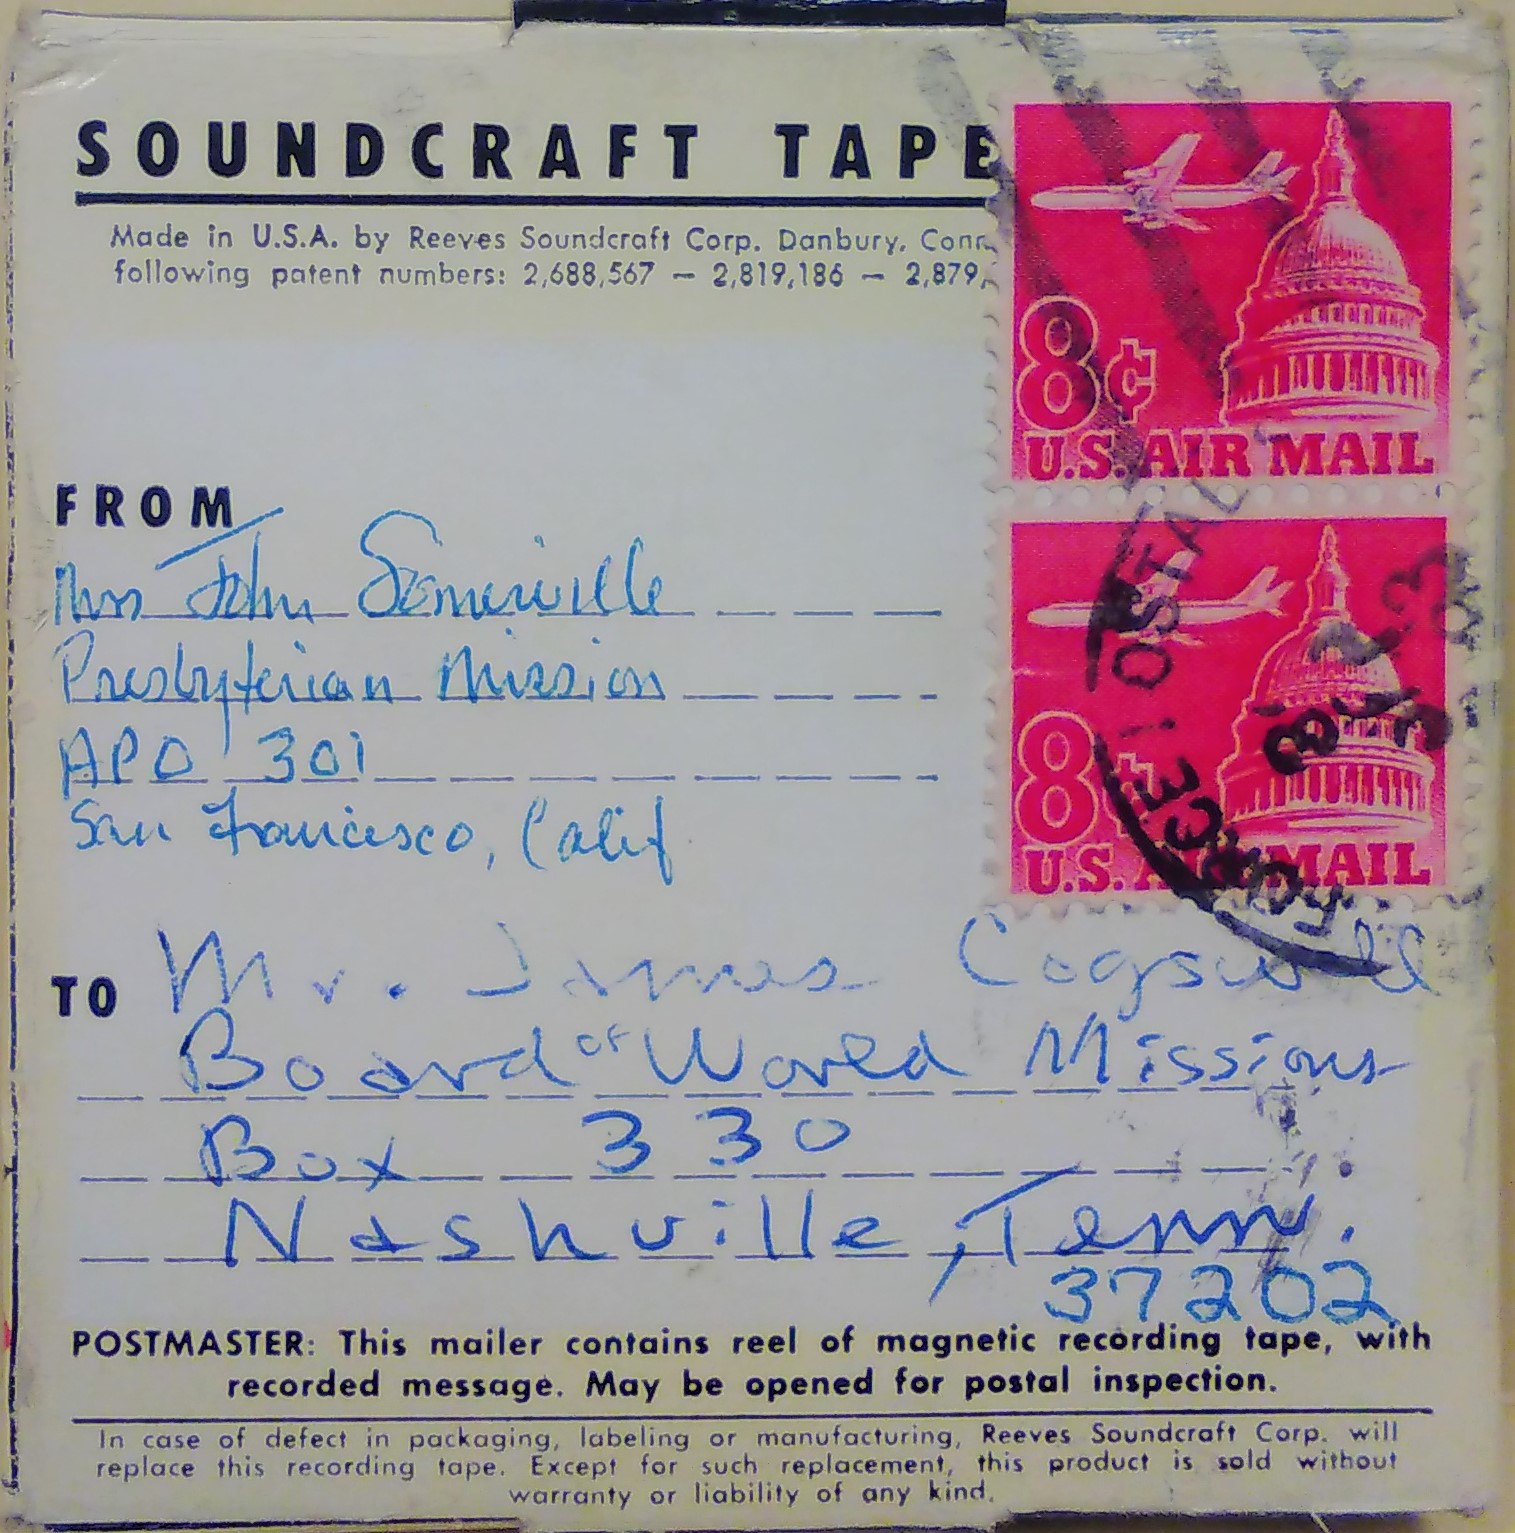 Culbertson audio letter to Cogswell, 1963, tape one, side two.